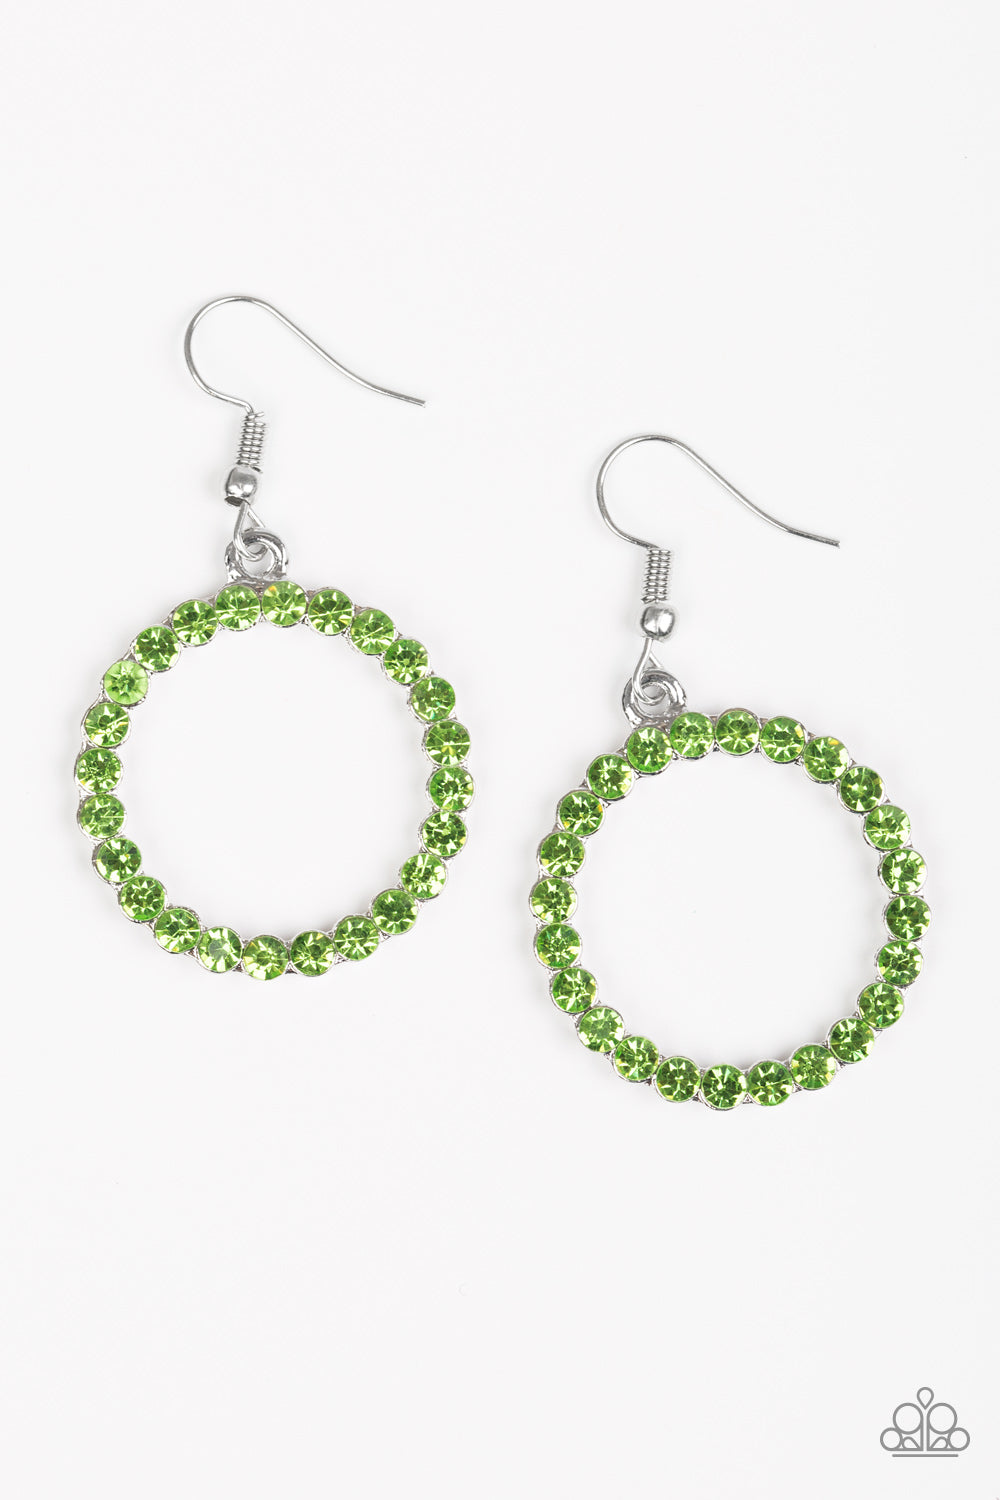 Bubblicious - Green Item #E429 Glittery green rhinestones are encrusted along a circular silver frame, creating a bubbly frame. Earring attaches to a standard fishhook fitting. All Paparazzi Accessories are lead free and nickel free!  Sold as one pair of earrings.